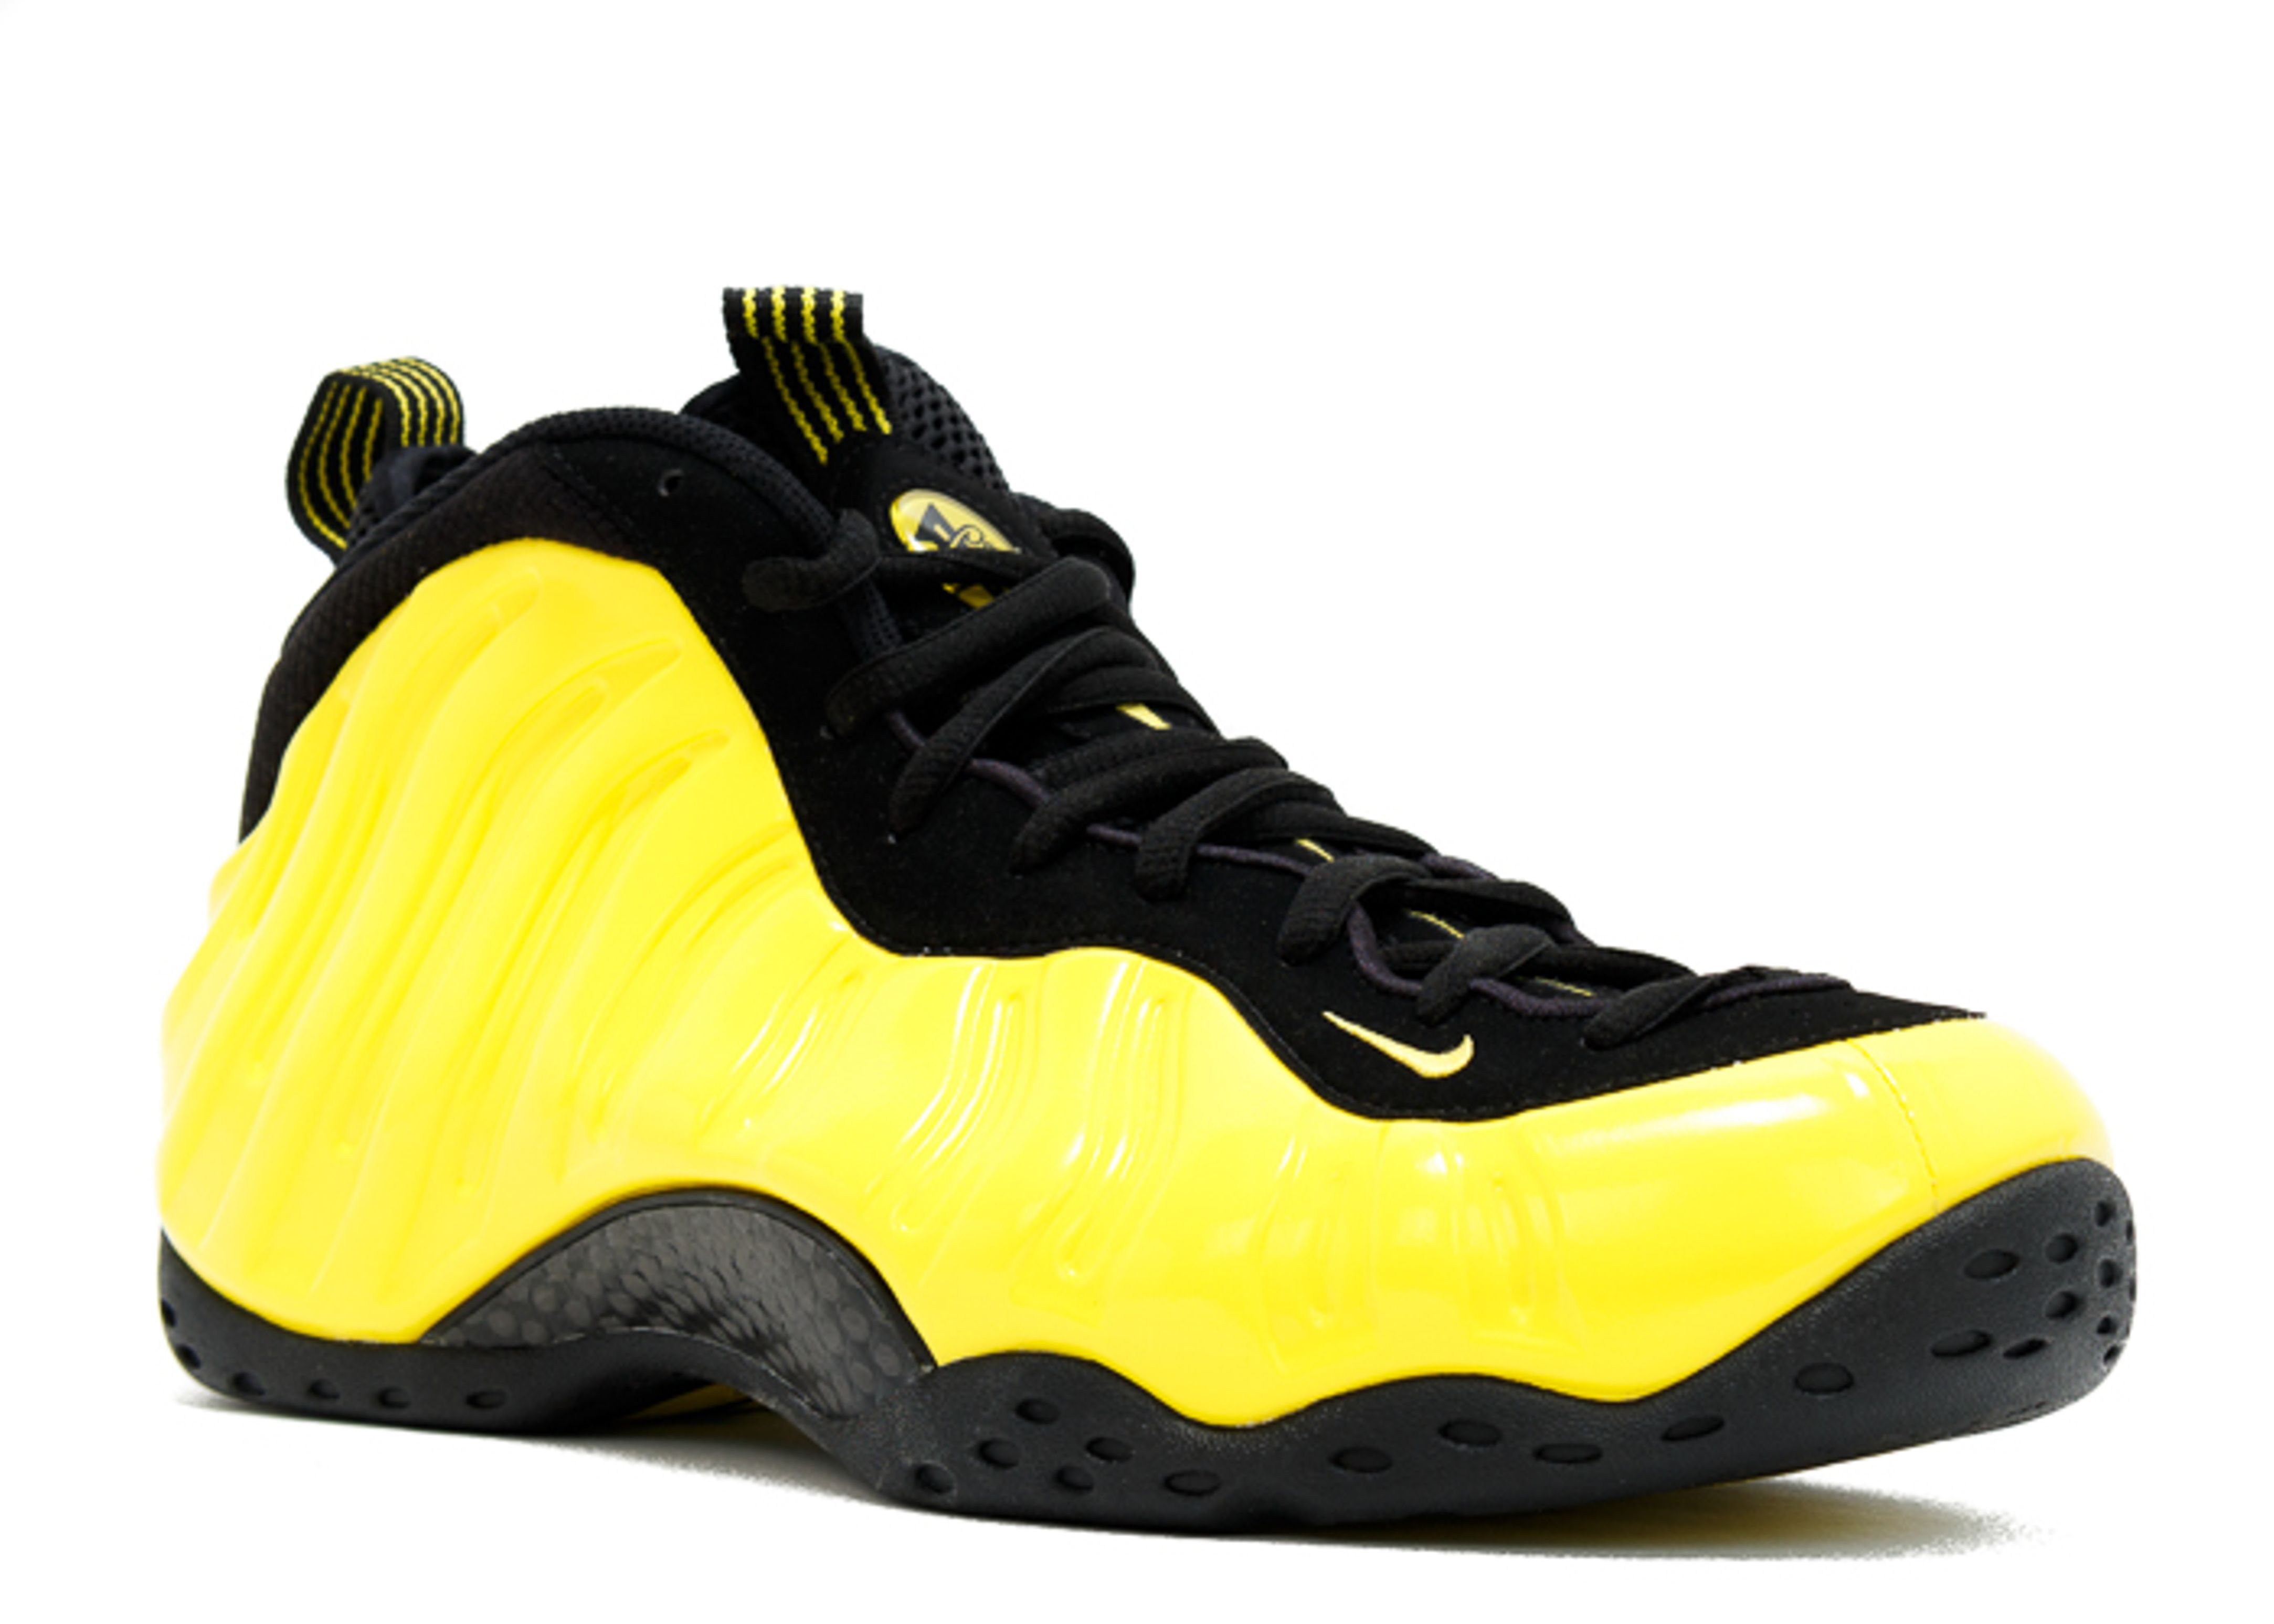 yellow foamposites for sale